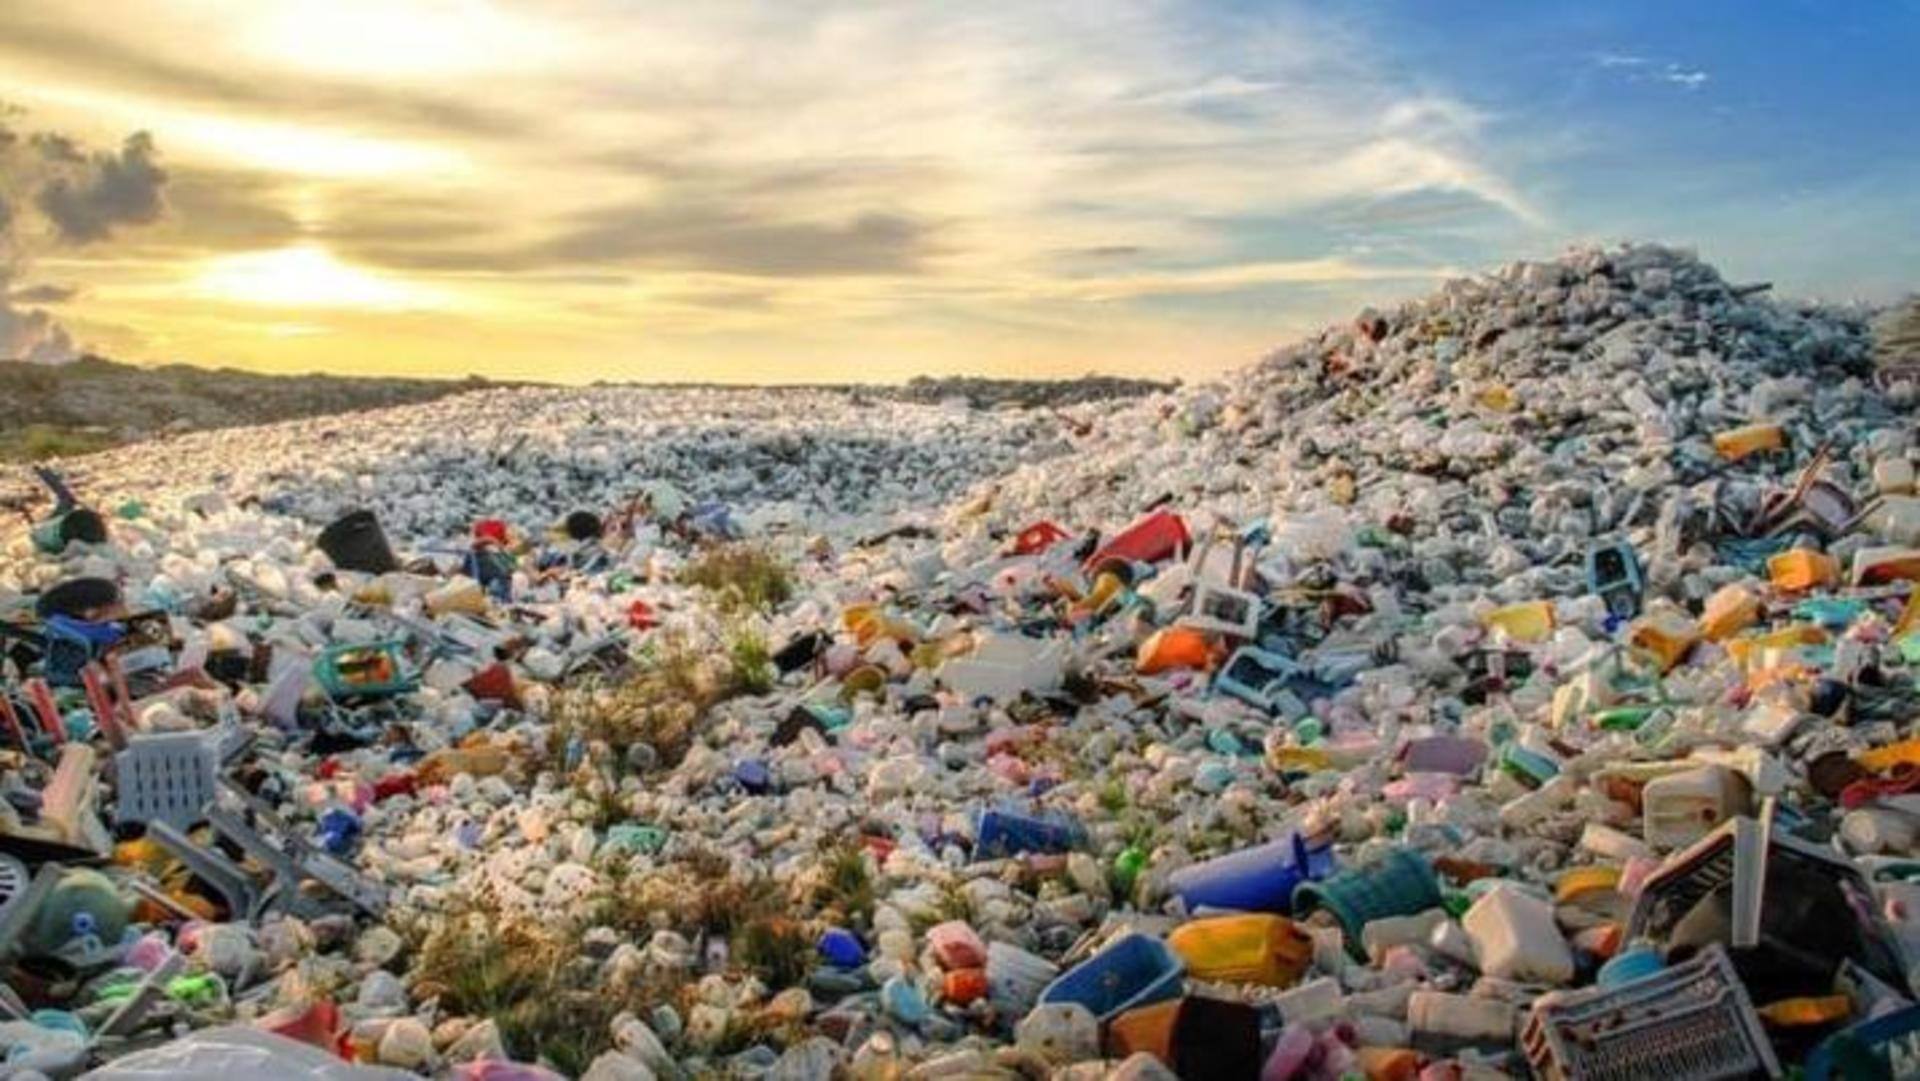 Plastic pollution can be reduced by 80% by 2040: UN